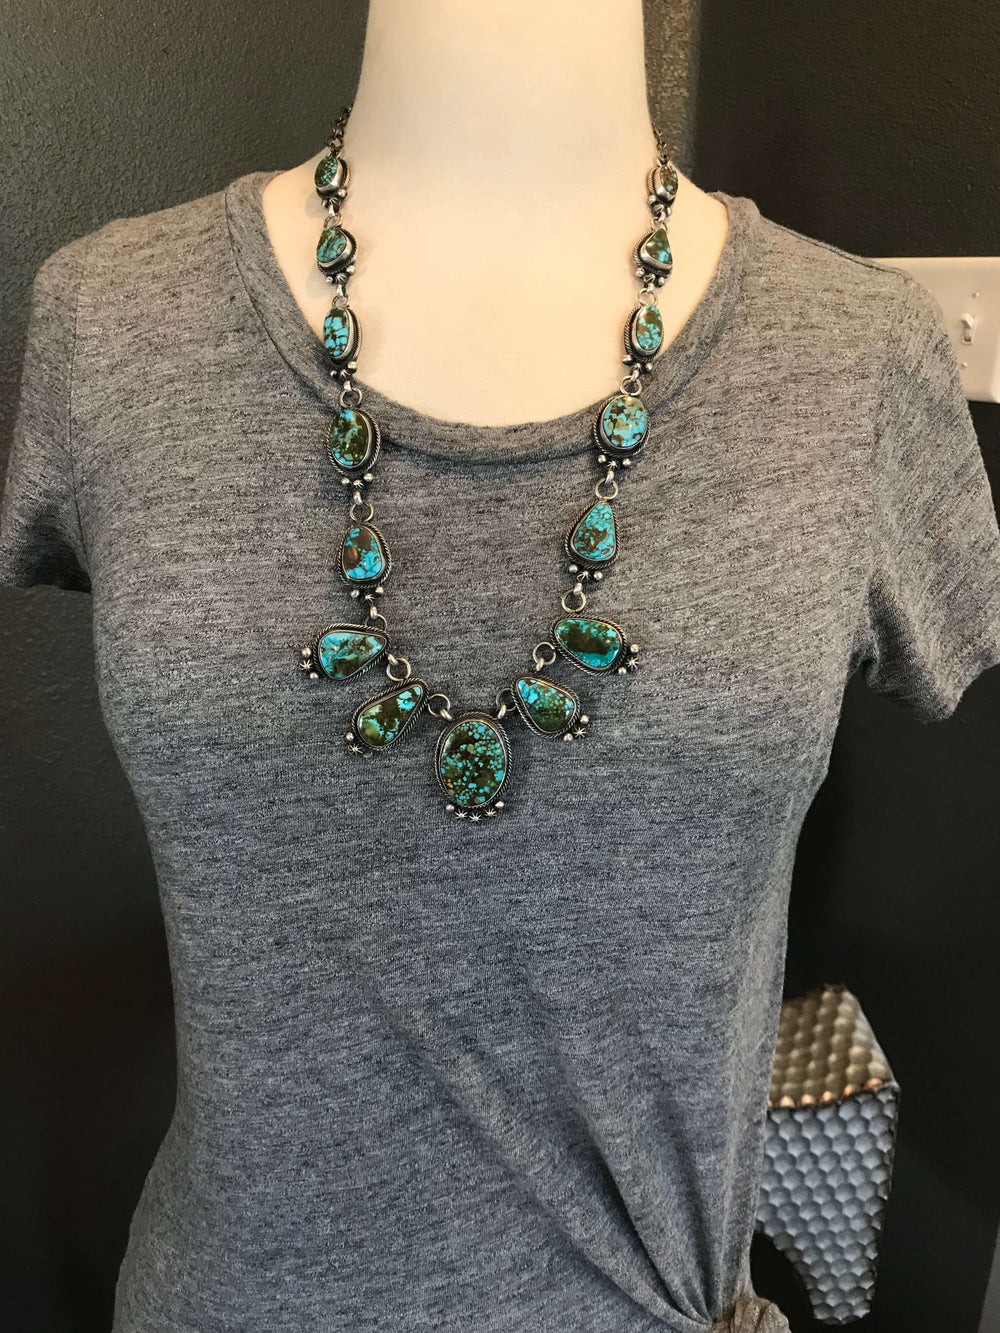 The Childress Turquoise Statement Necklace Set-Necklaces-Calli Co., Turquoise and Silver Jewelry, Native American Handmade, Zuni Tribe, Navajo Tribe, Brock Texas